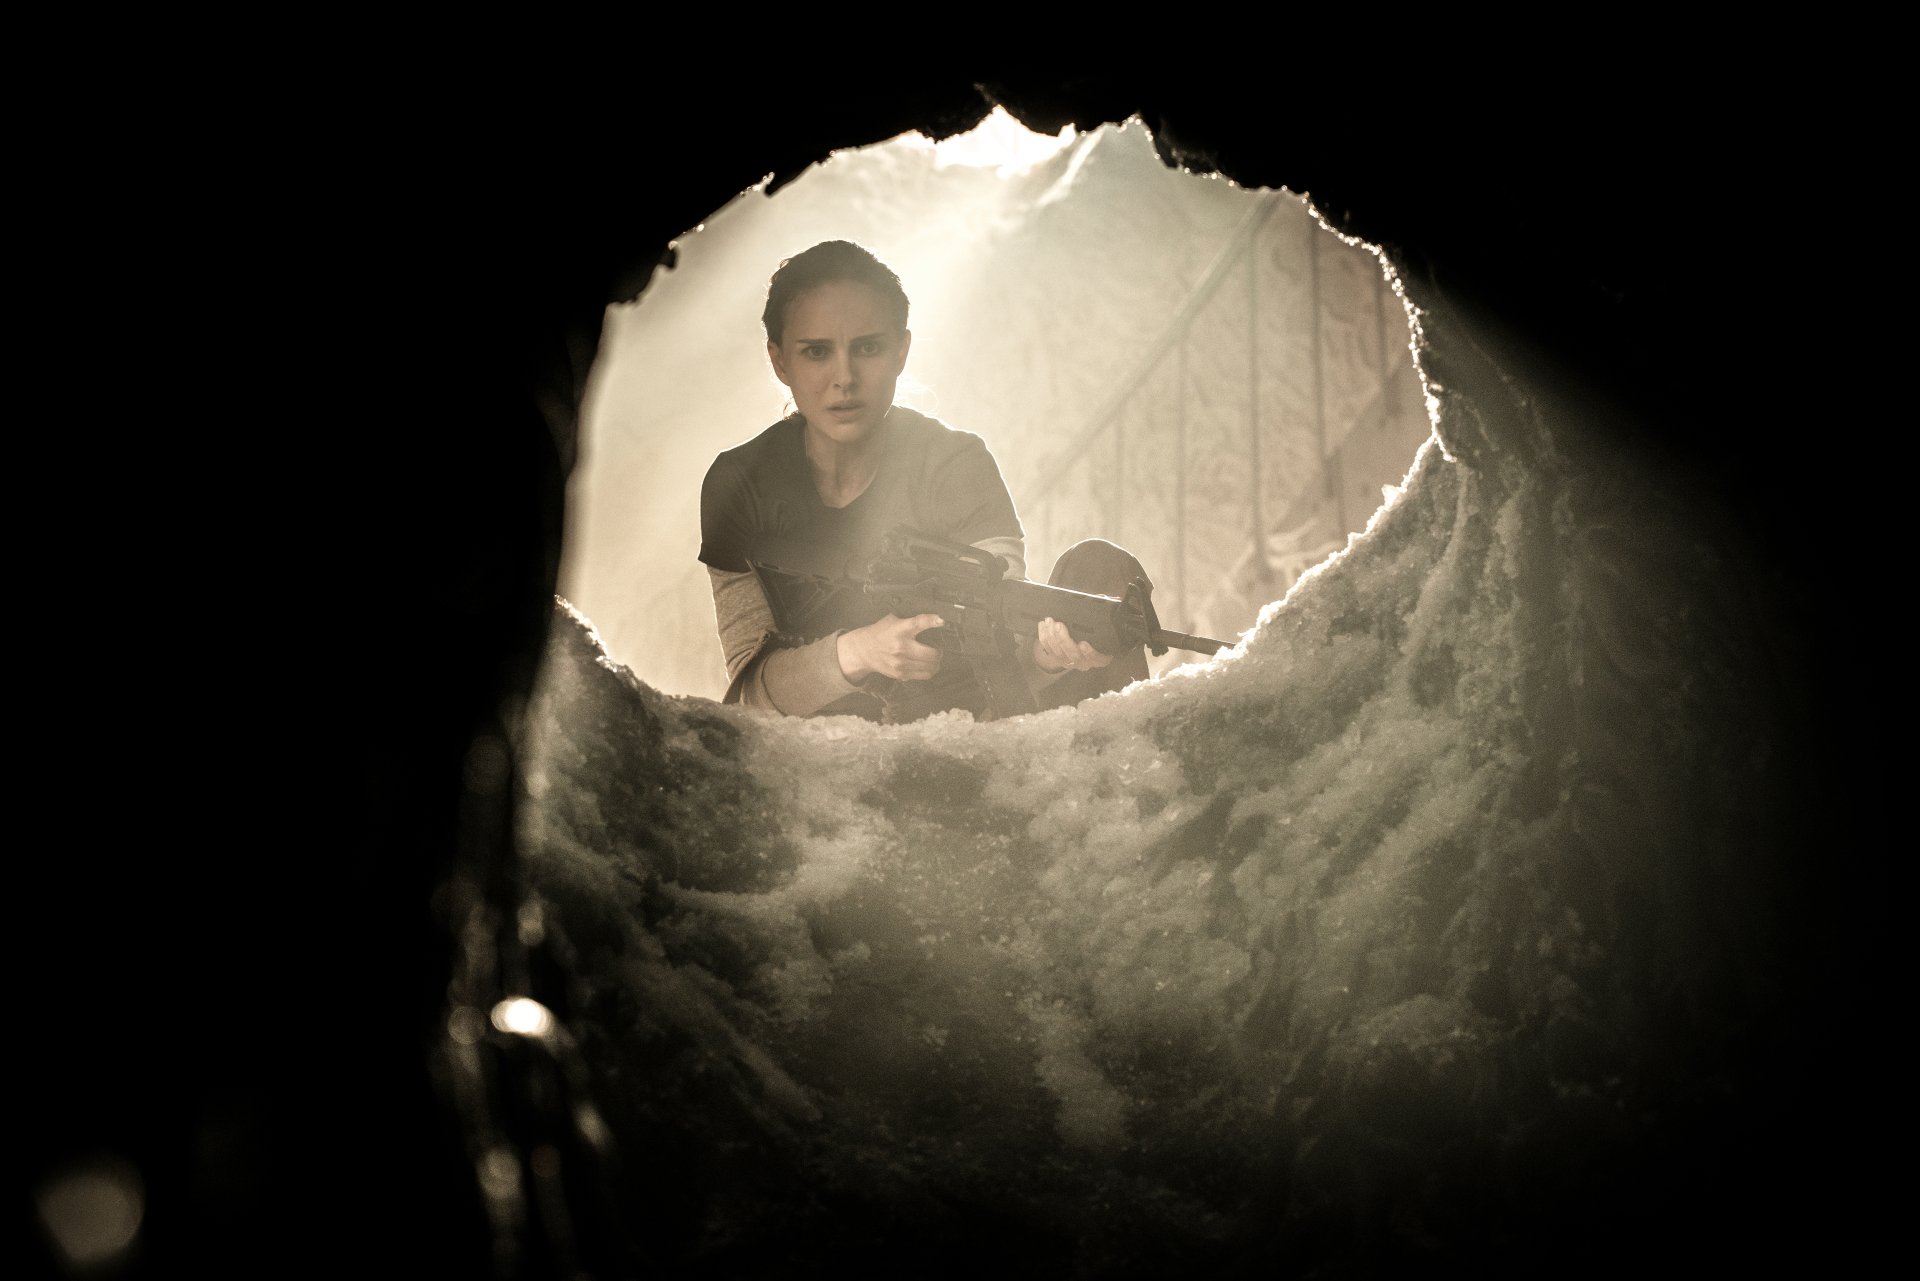 HD wallpaper featuring a character played by Natalie Portman peering through an opening, from the film Annihilation.